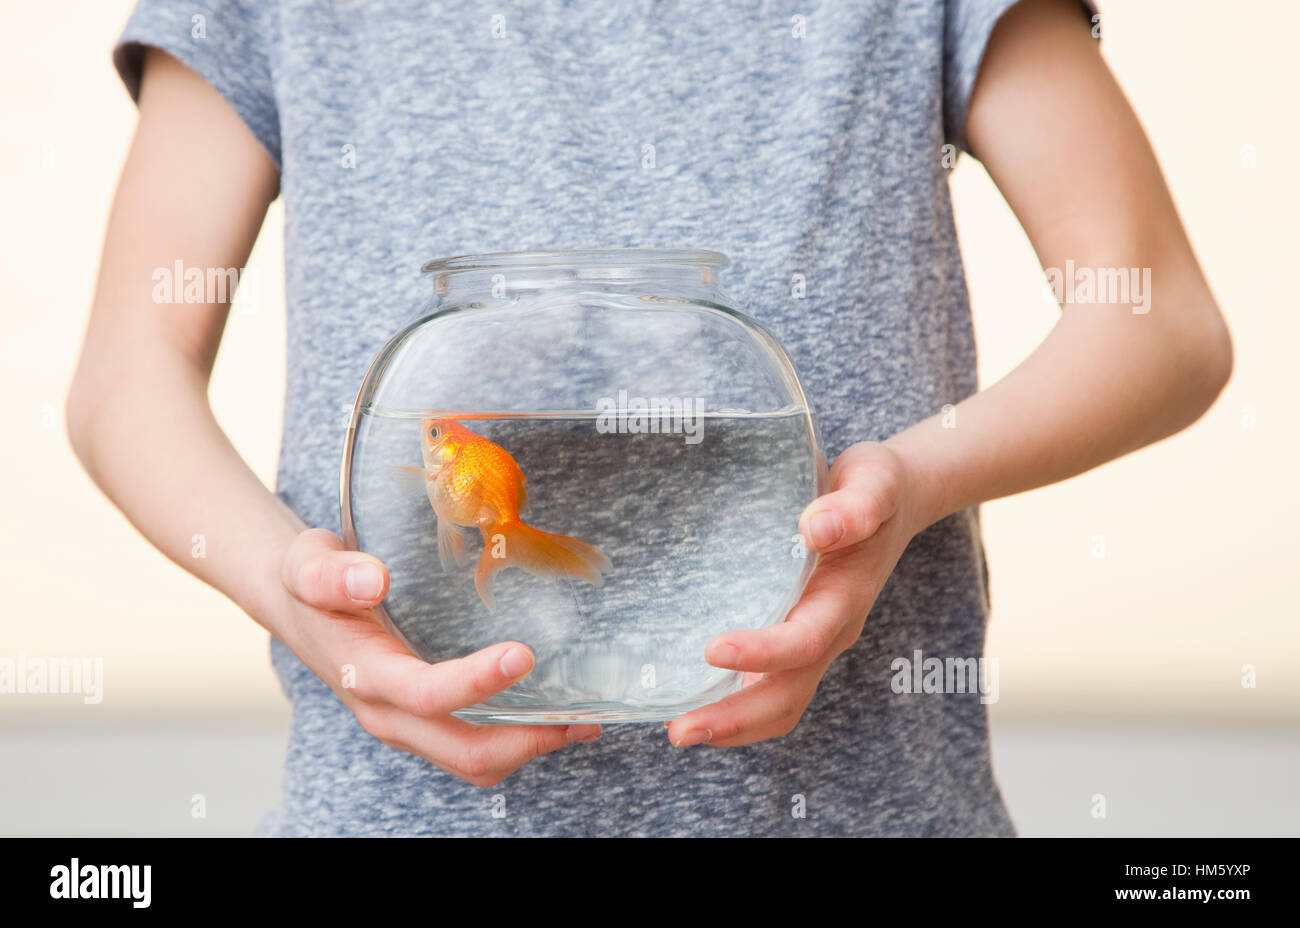 Girl (6-7) holding goldfish in fishbowl Banque D'Images